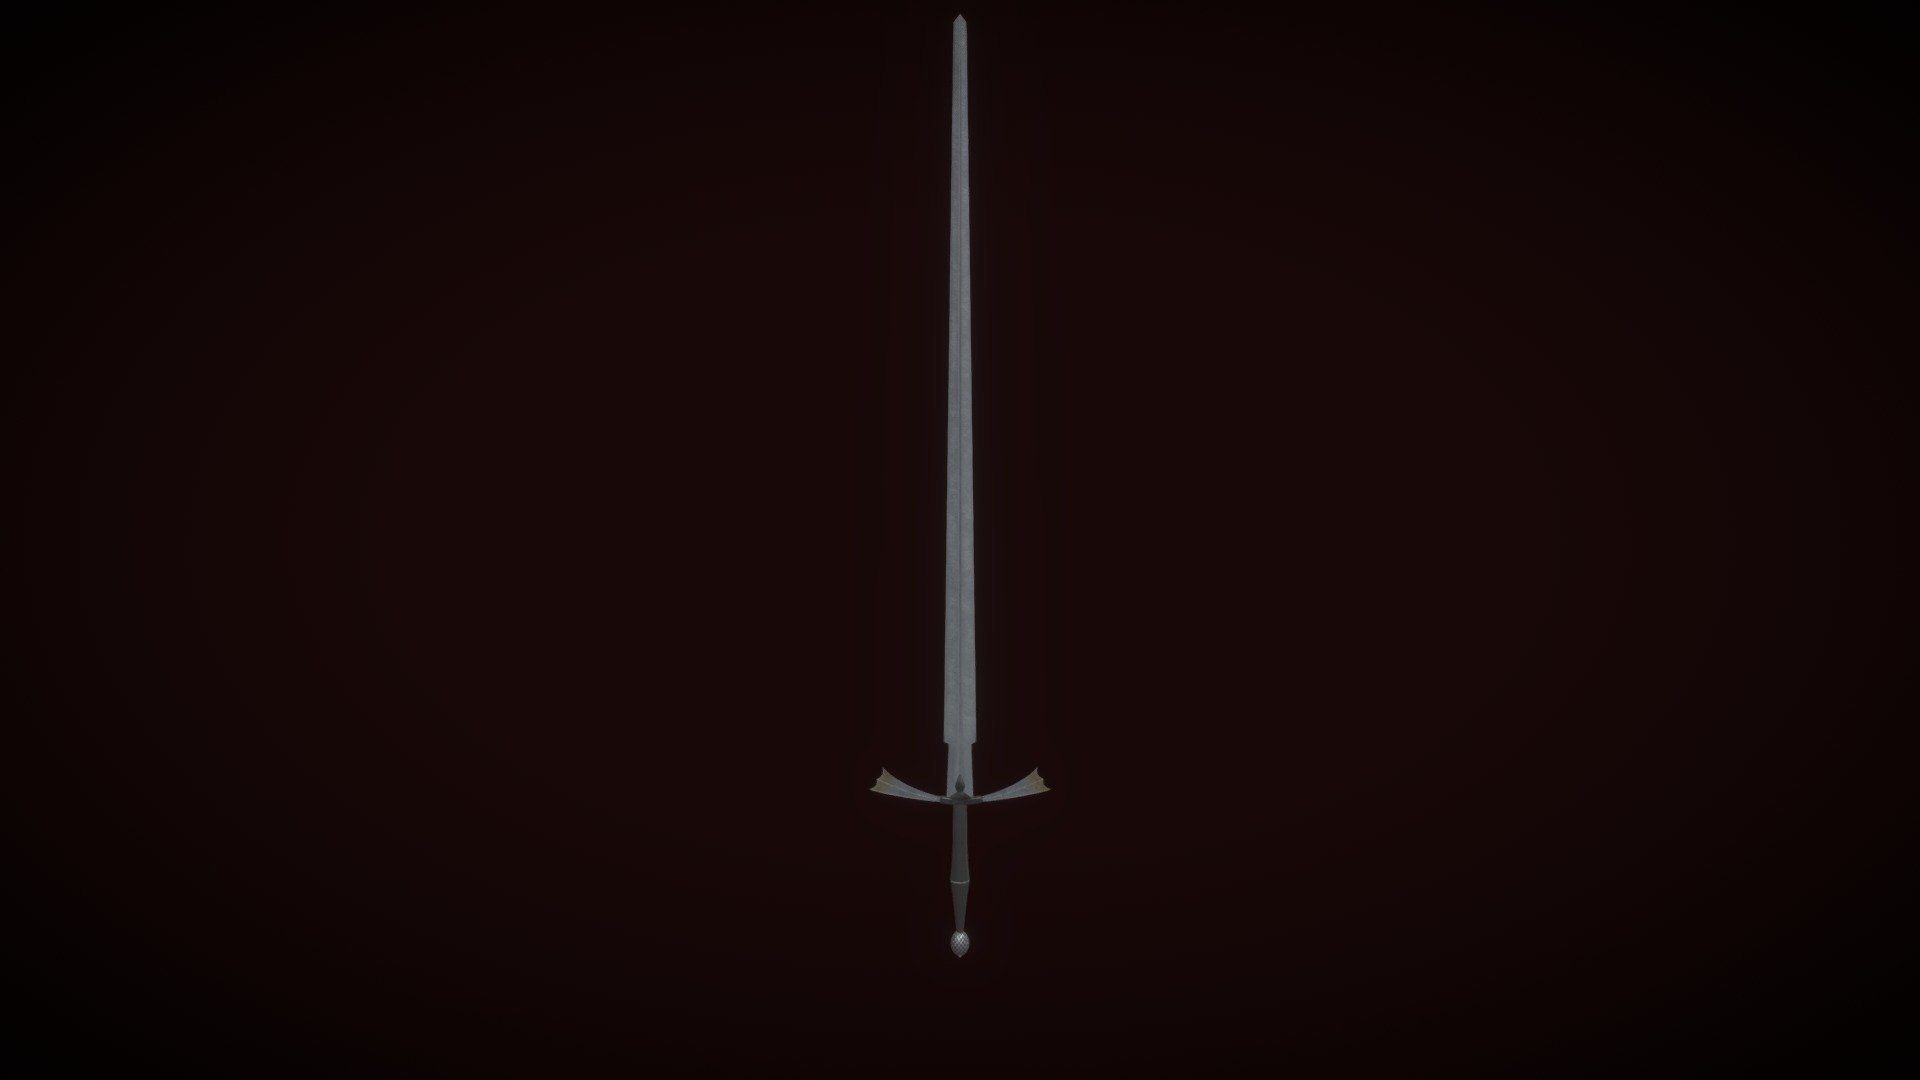 One of the anscestral blades of House Targaryen. This is my first rendition of Dark Sister as portrayed on the show.

Modeled in Cinema4D, textured in Substance Painter 3d model